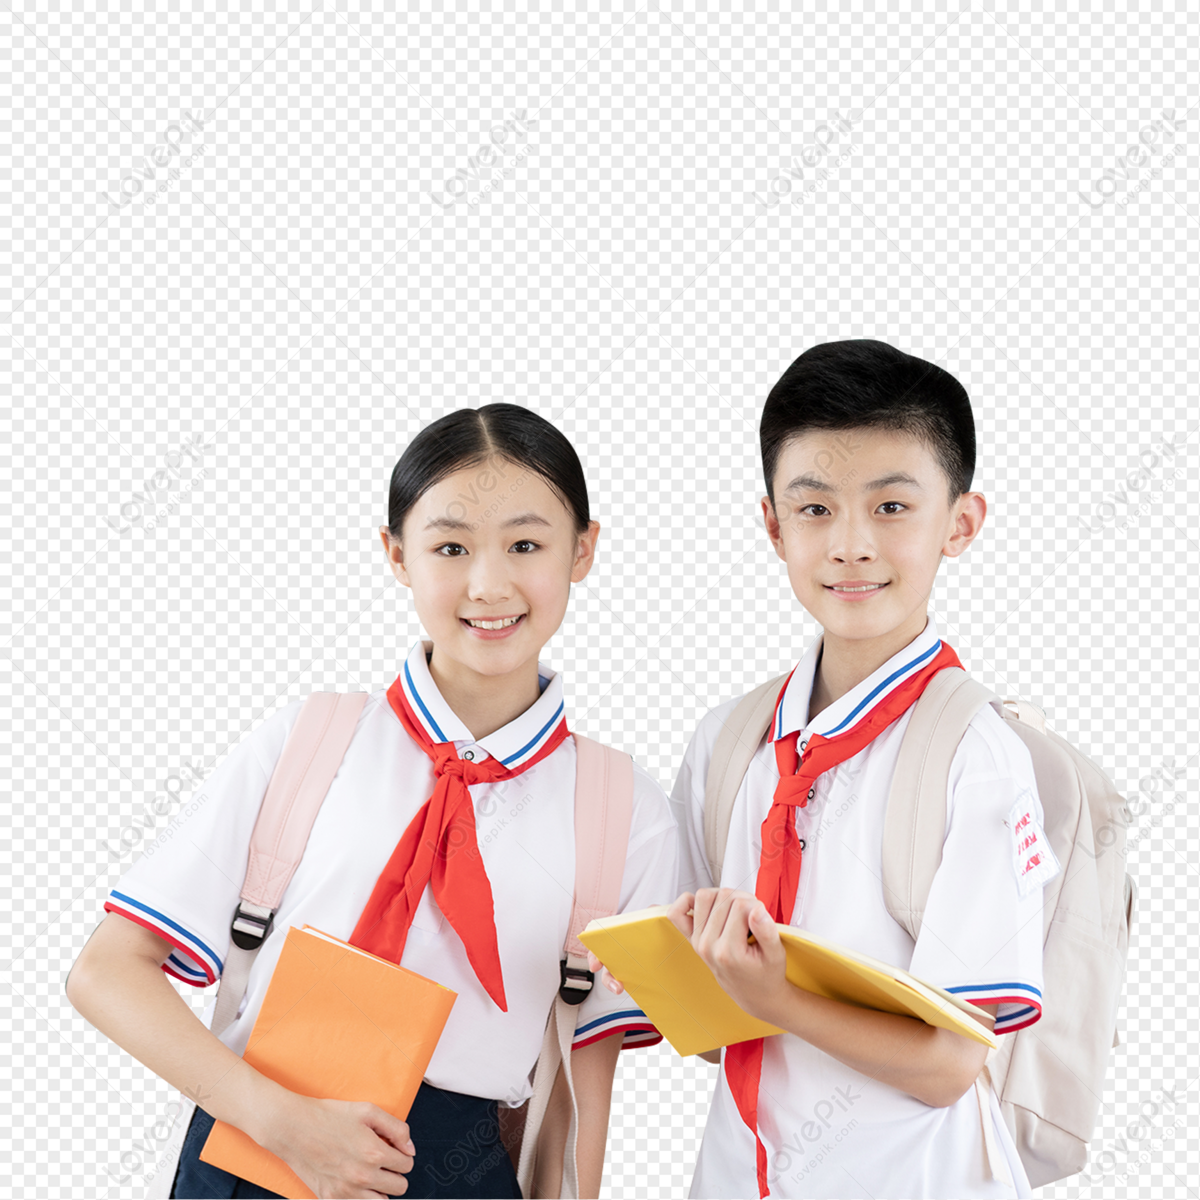 Junior High School Student Image PNG Hd Transparent Image And Clipart Image  For Free Download - Lovepik | 401807384